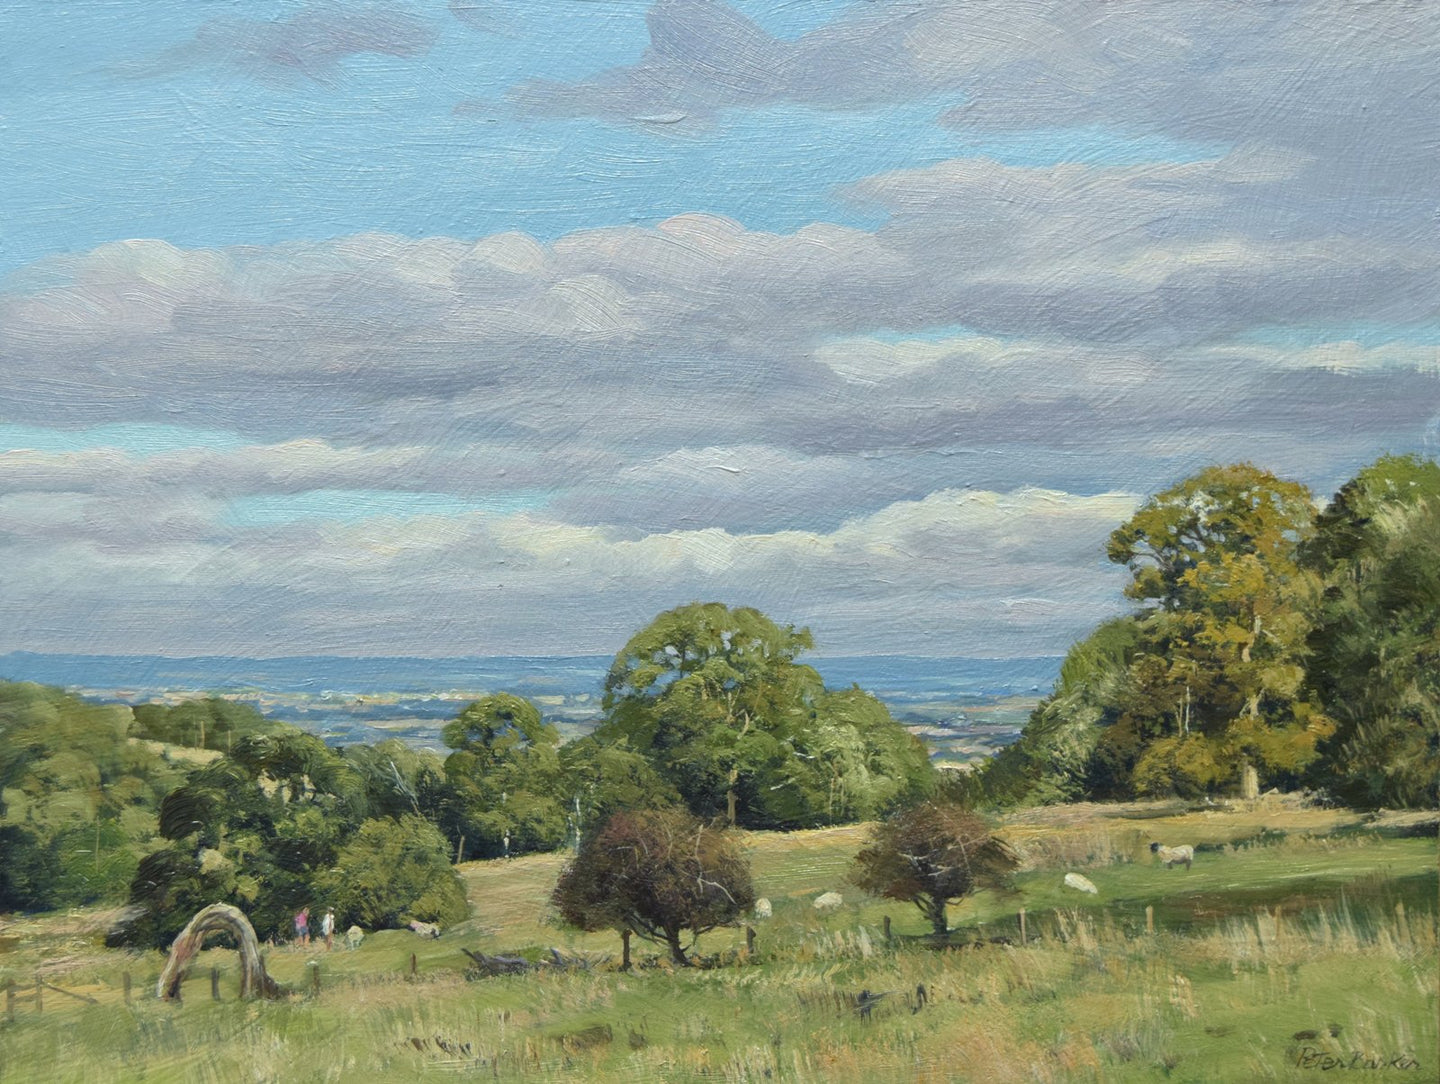 A 9 x 12 inch oil painting from near Snowshill in the Cotswolds, looking over the valley towards Broadway in the distance, with a natural arch on the left mid-ground, made from a collapsed dead tree.